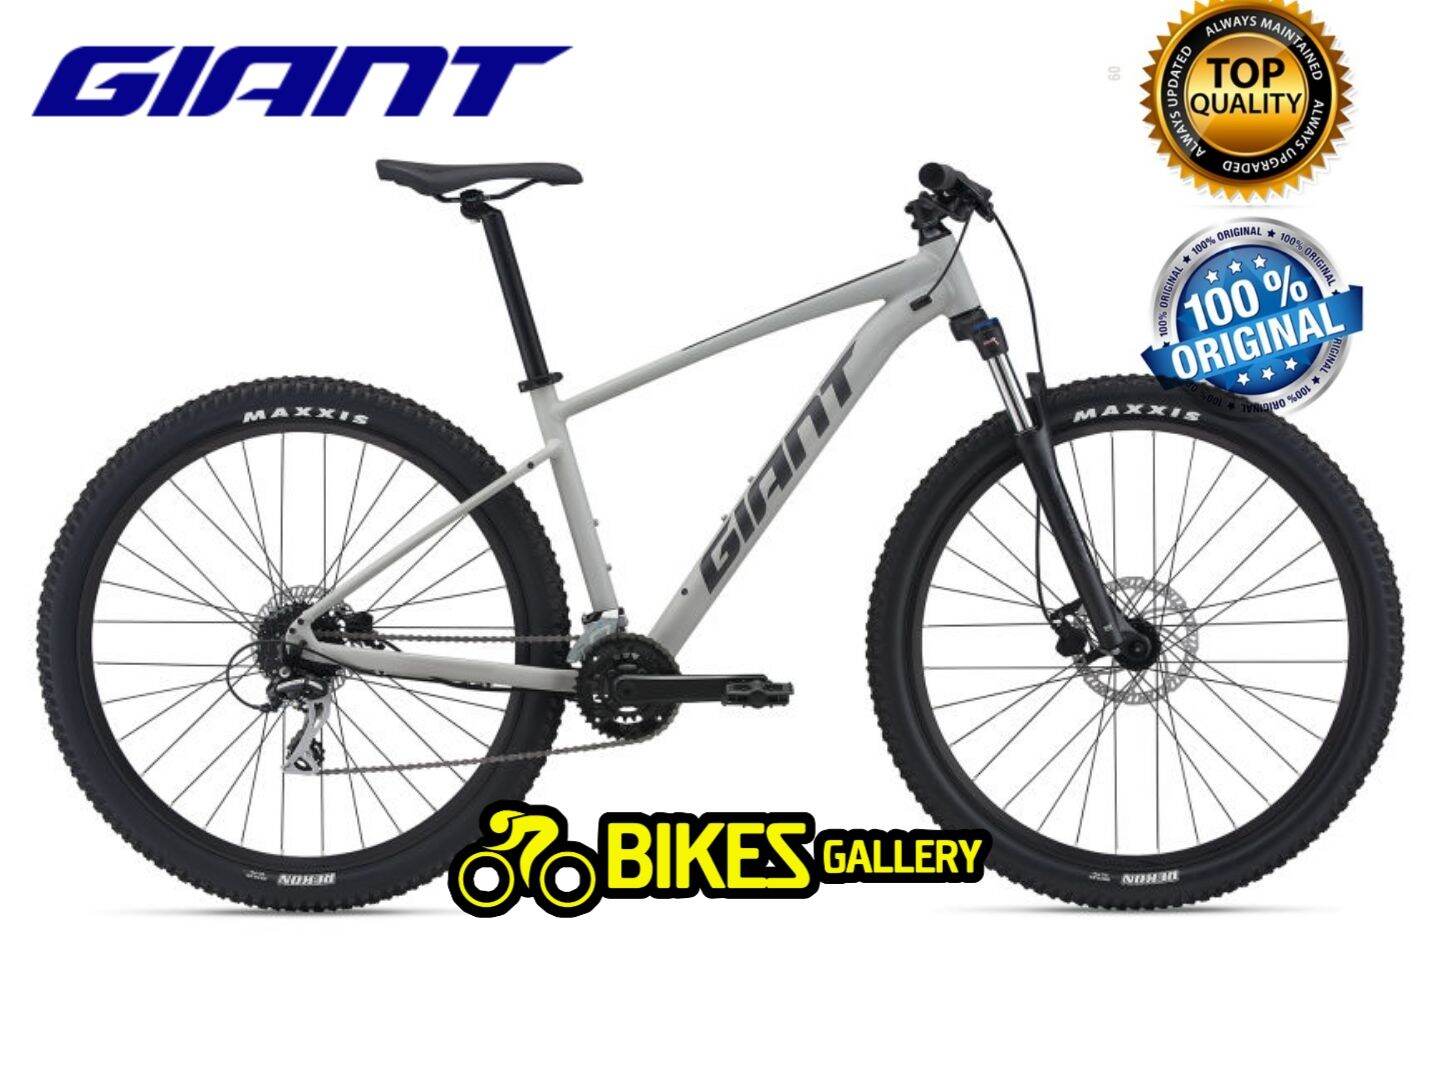 Giant Mountain Bikes For The Best Price In Malaysia